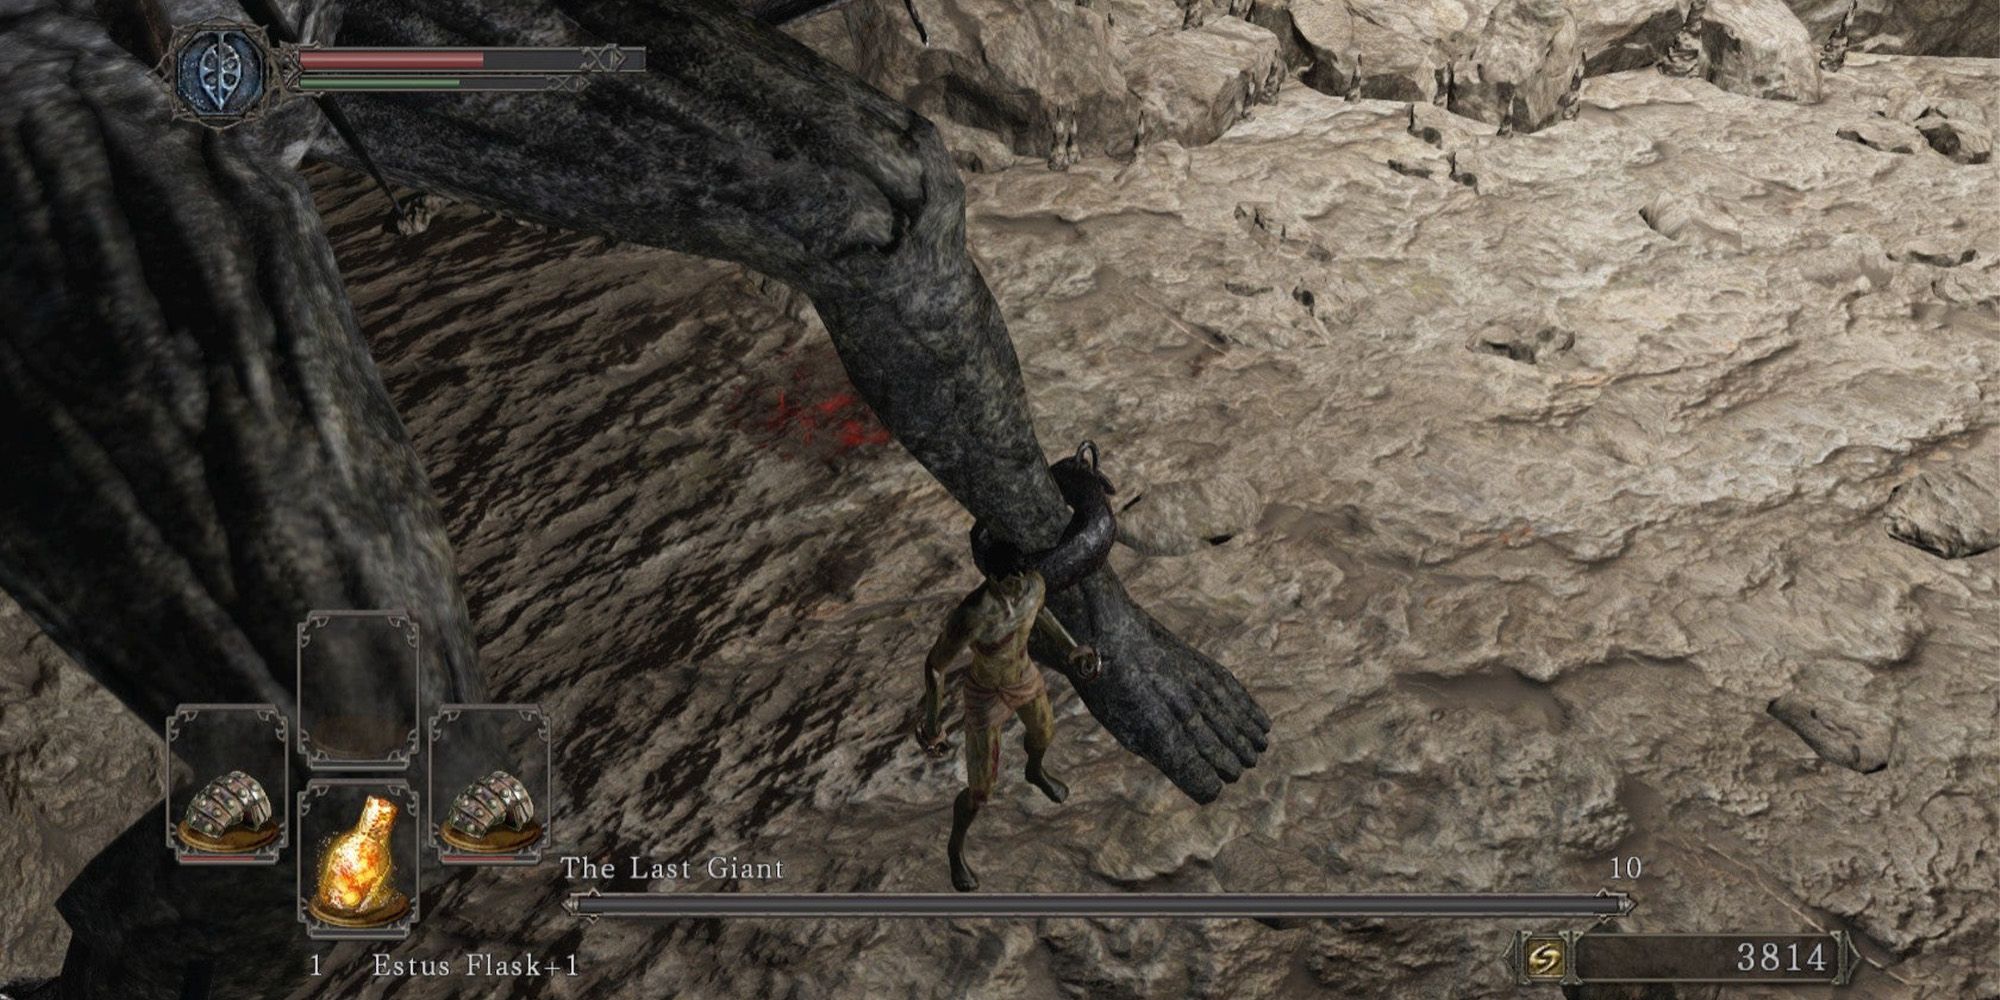 A player beating the Last Giant boss equipped with two caesti. Dark Souls 2